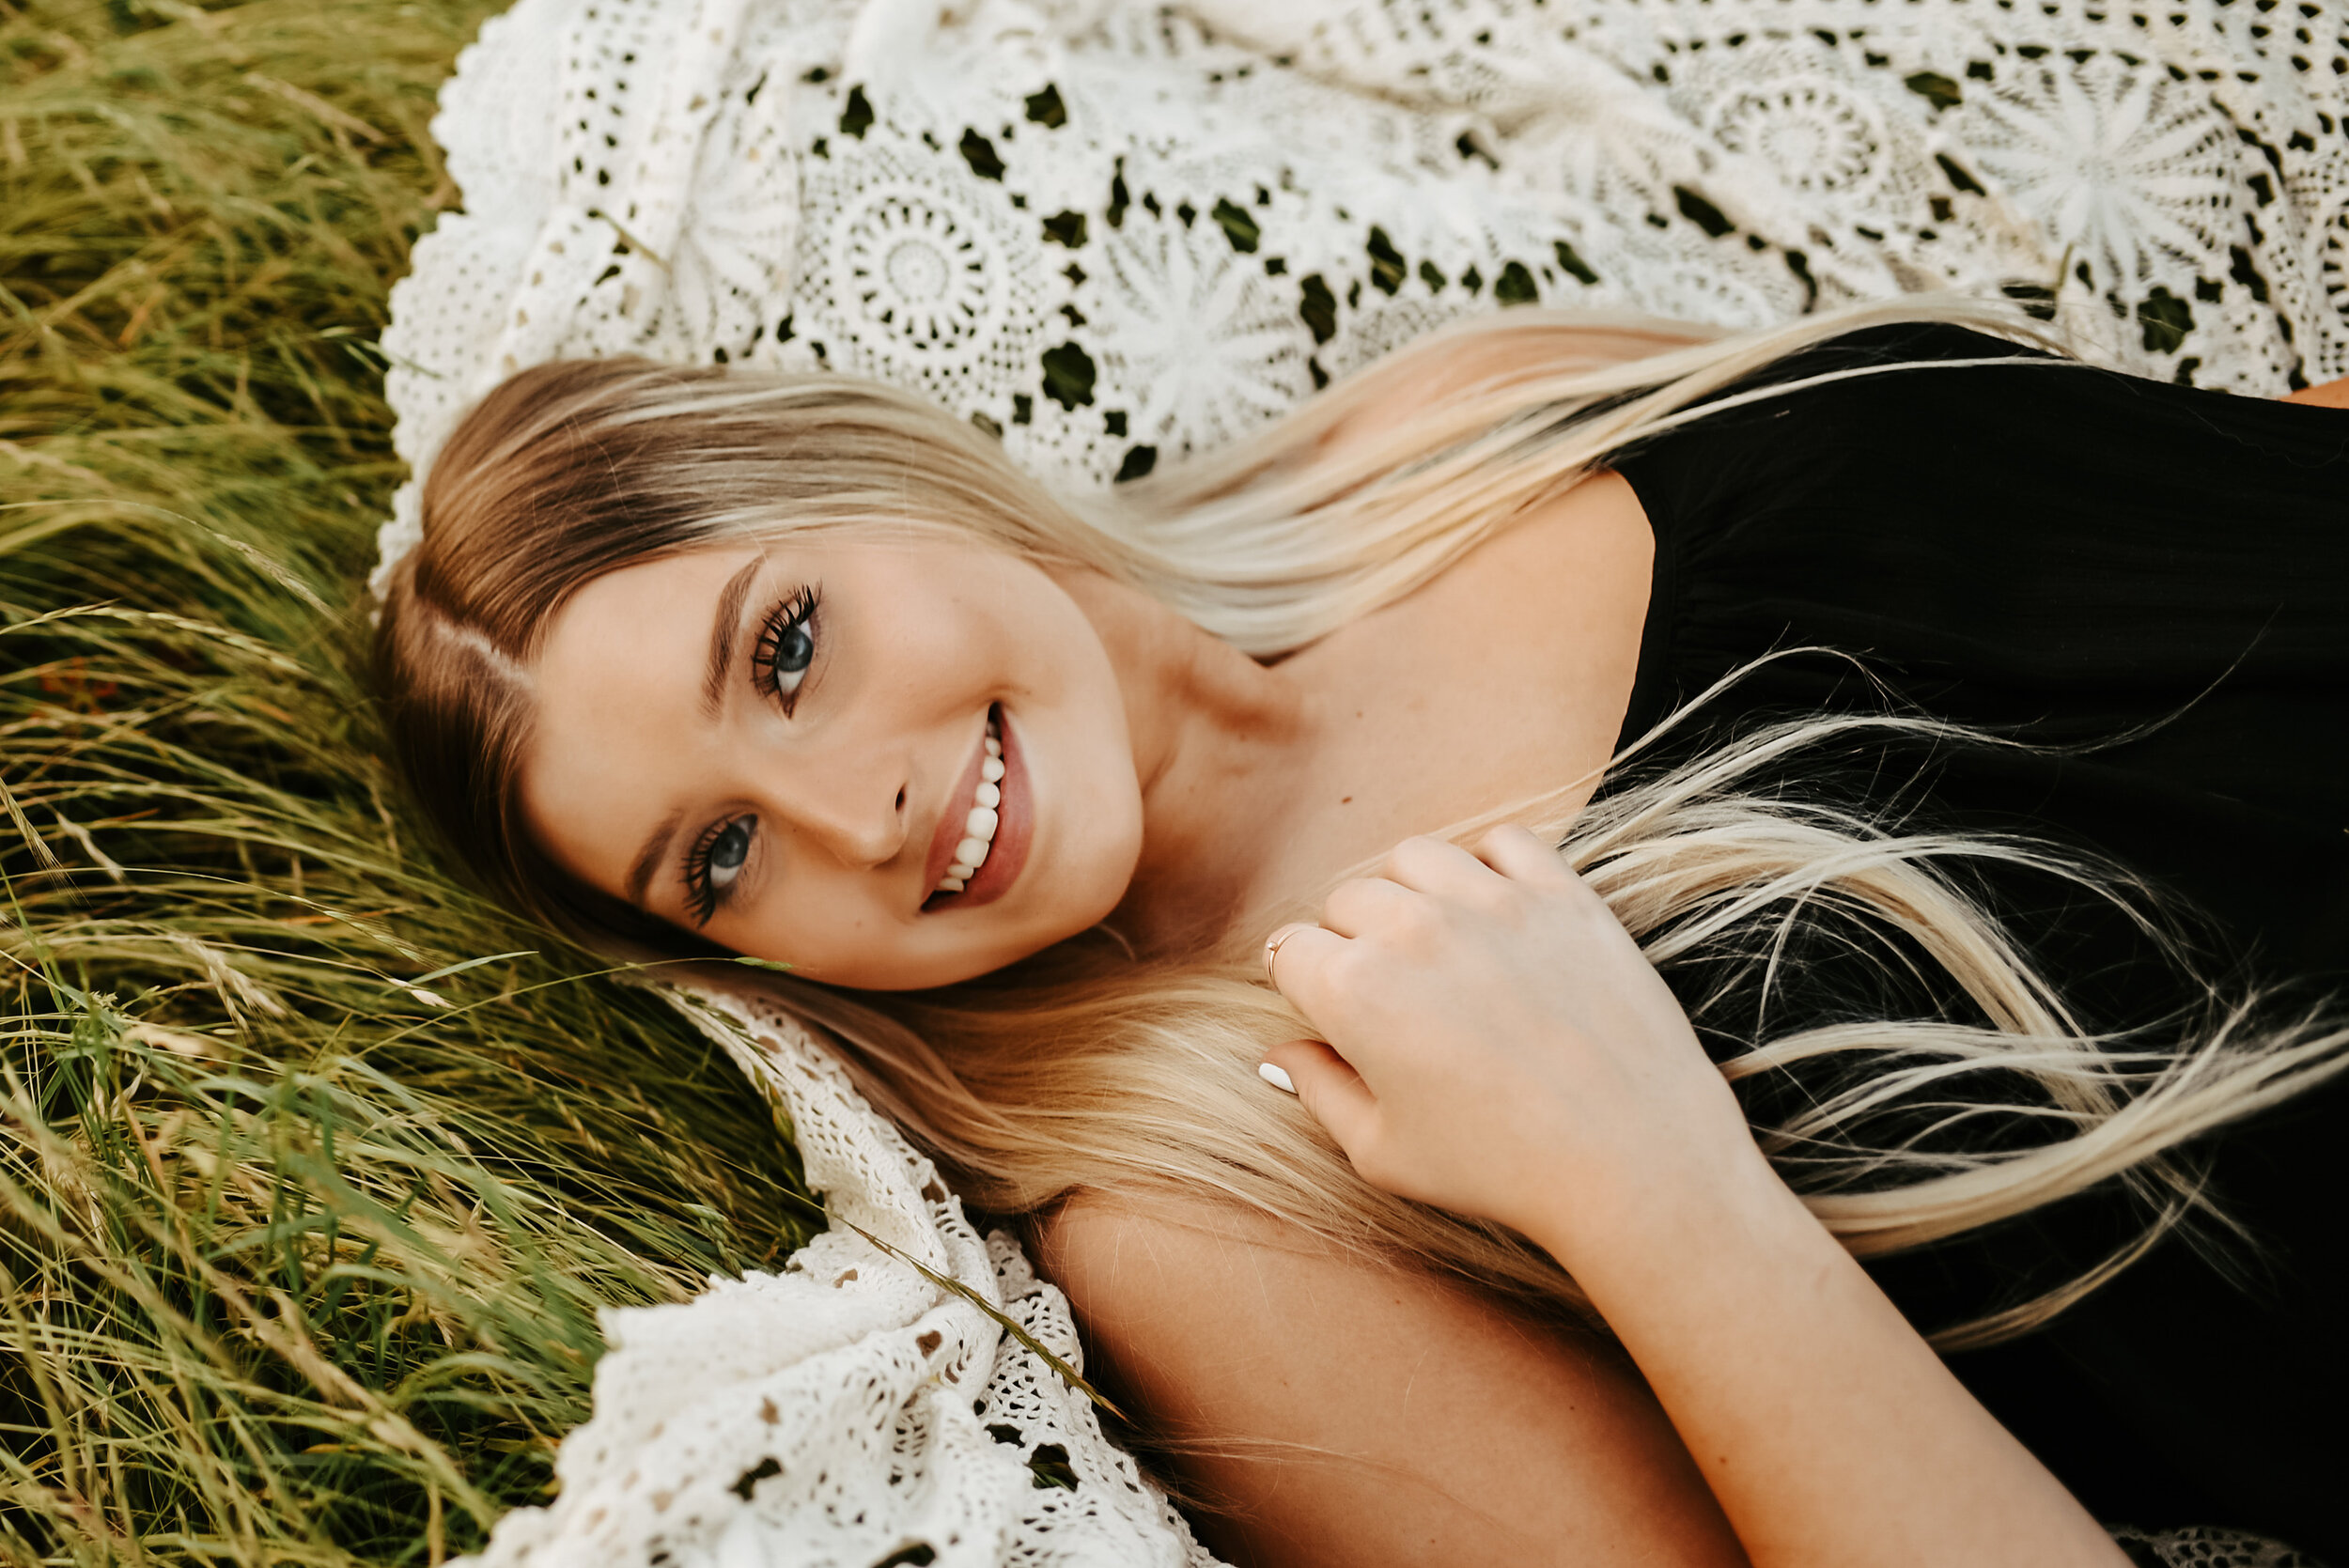 Senior girl laying on lace blanket smiling at photographer